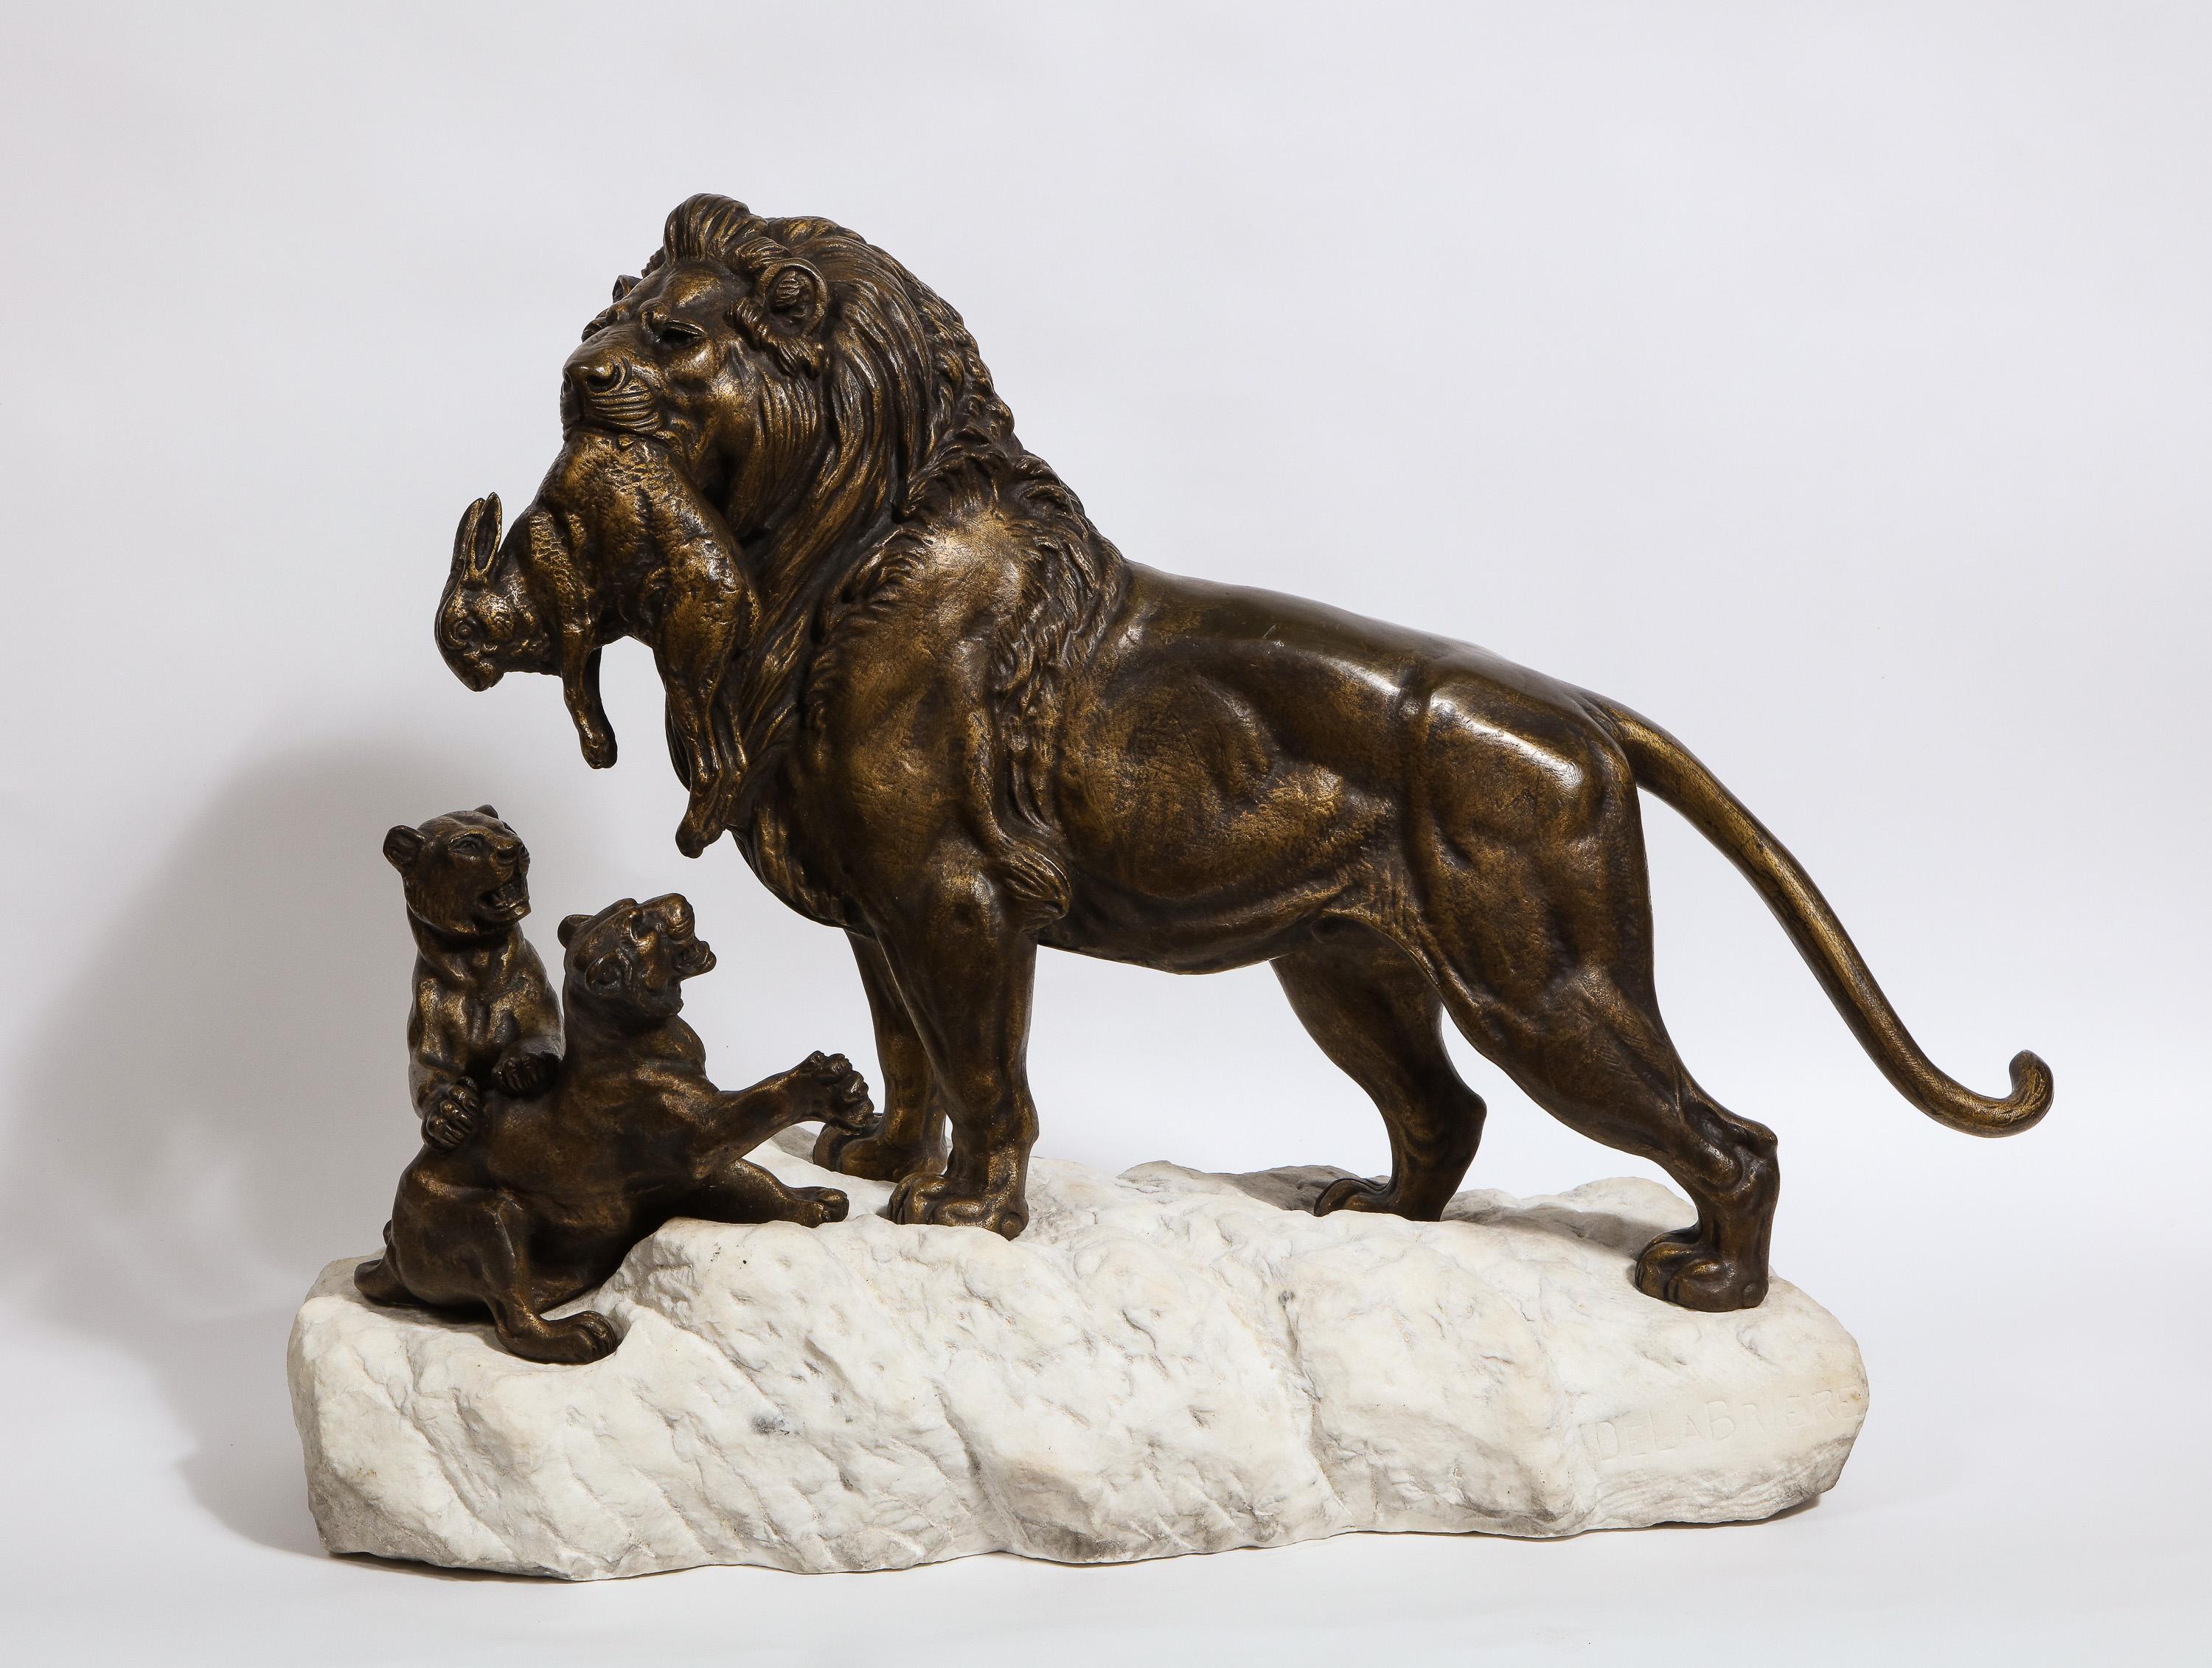 Paul-Edouard Delabriere (French, 1829-1923) large bronze sculpture of a lion with cubs with a squirrel as its prey, on a white marble rock base.

Very nice quality 19th century sculpture. Signed DELABRIERE on the lower right marble. Perfect for